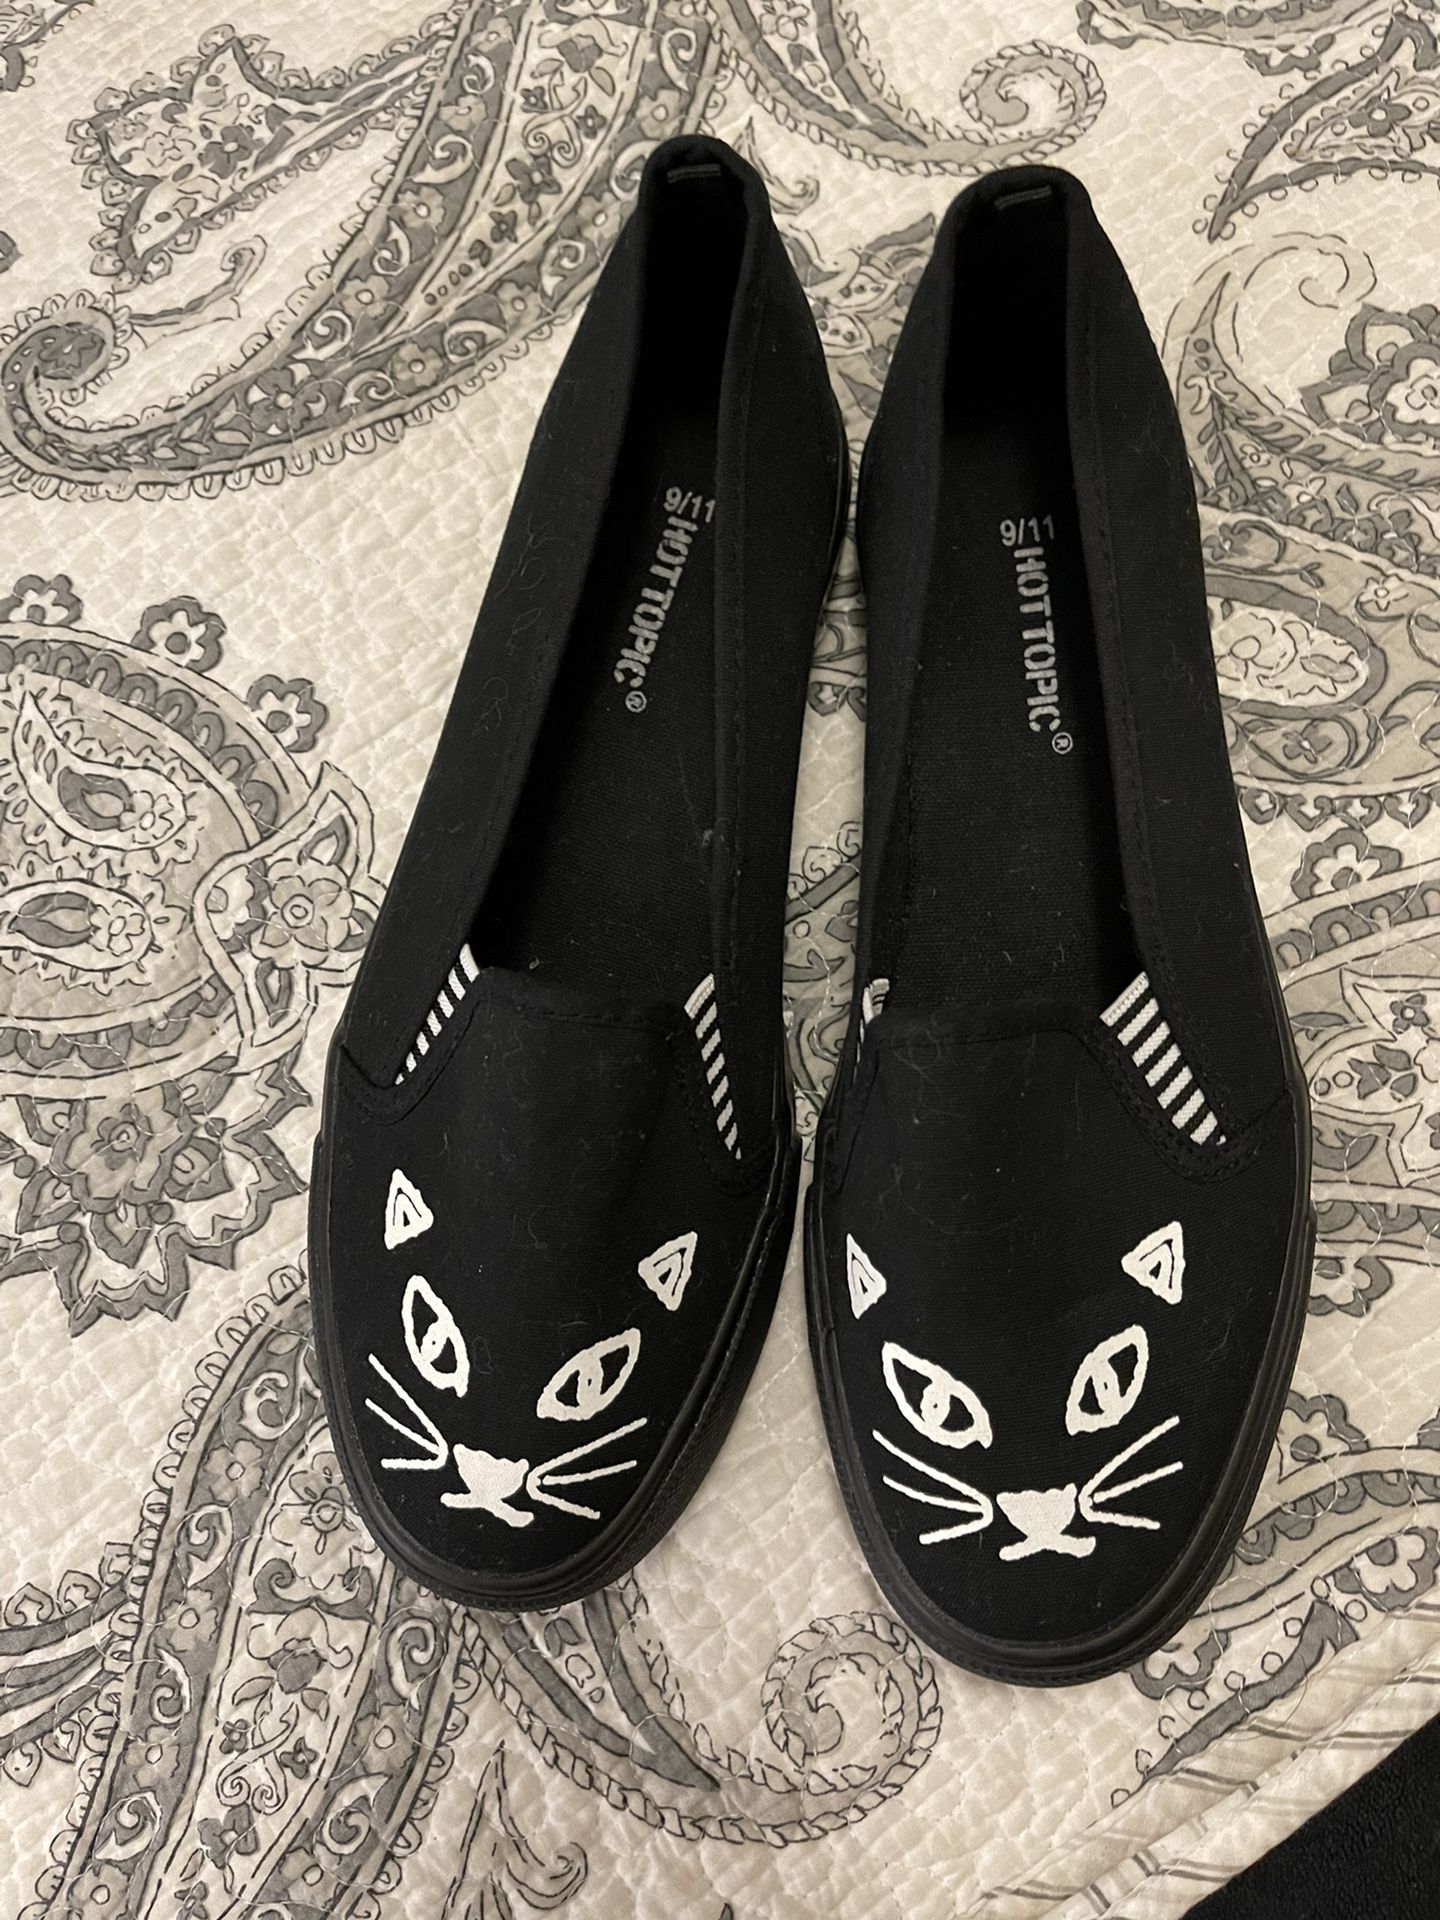 Hot Topic Cat Shoes